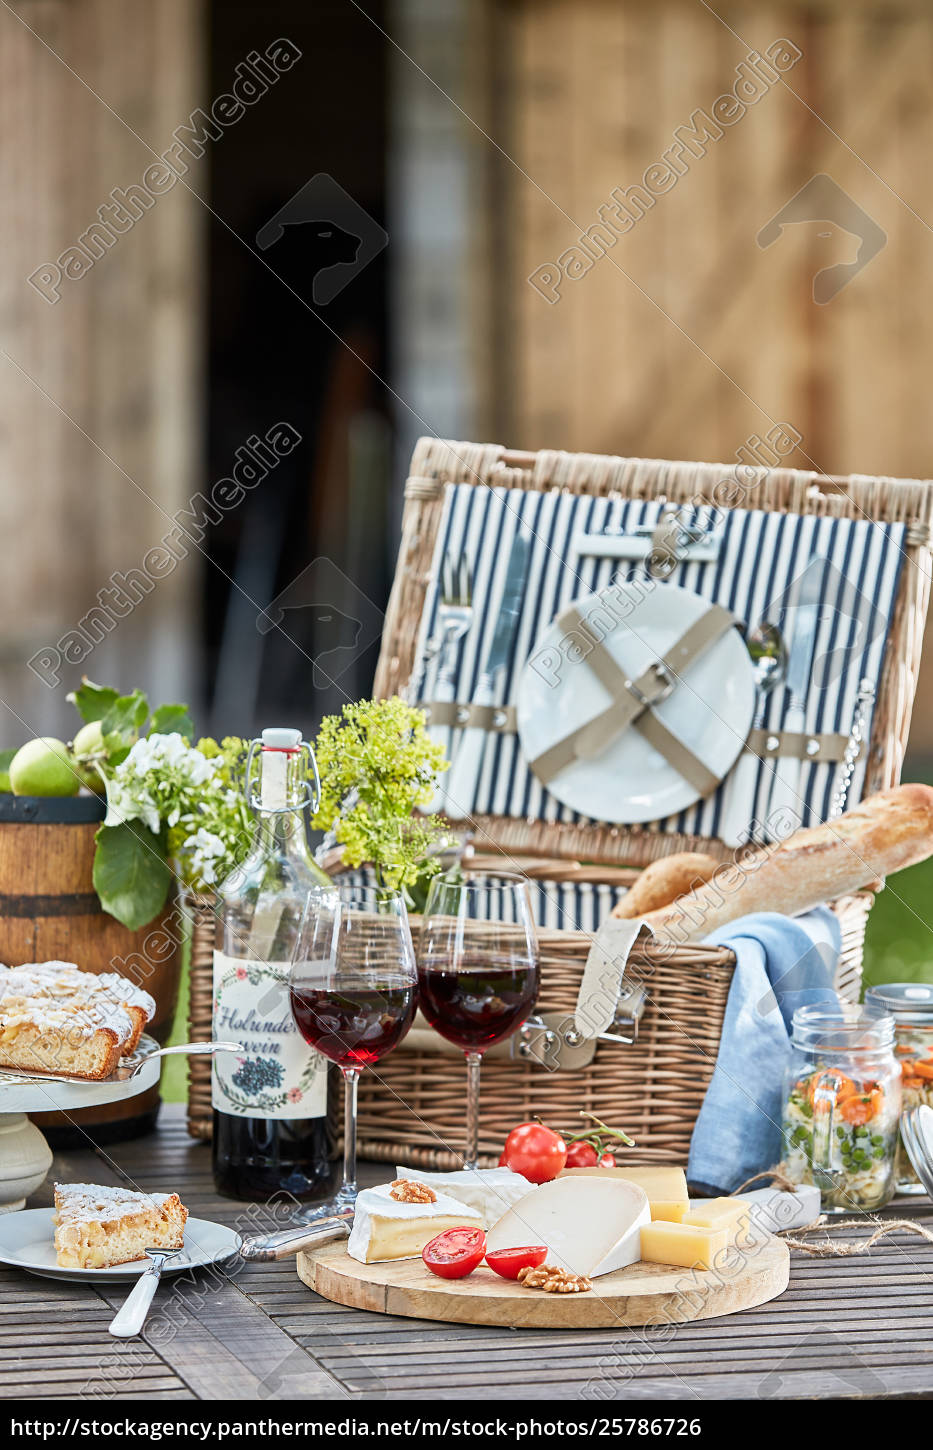 Vintage picnic hamper with wine cheese and tart - Stock image - #25786726 | PantherMedia Stock